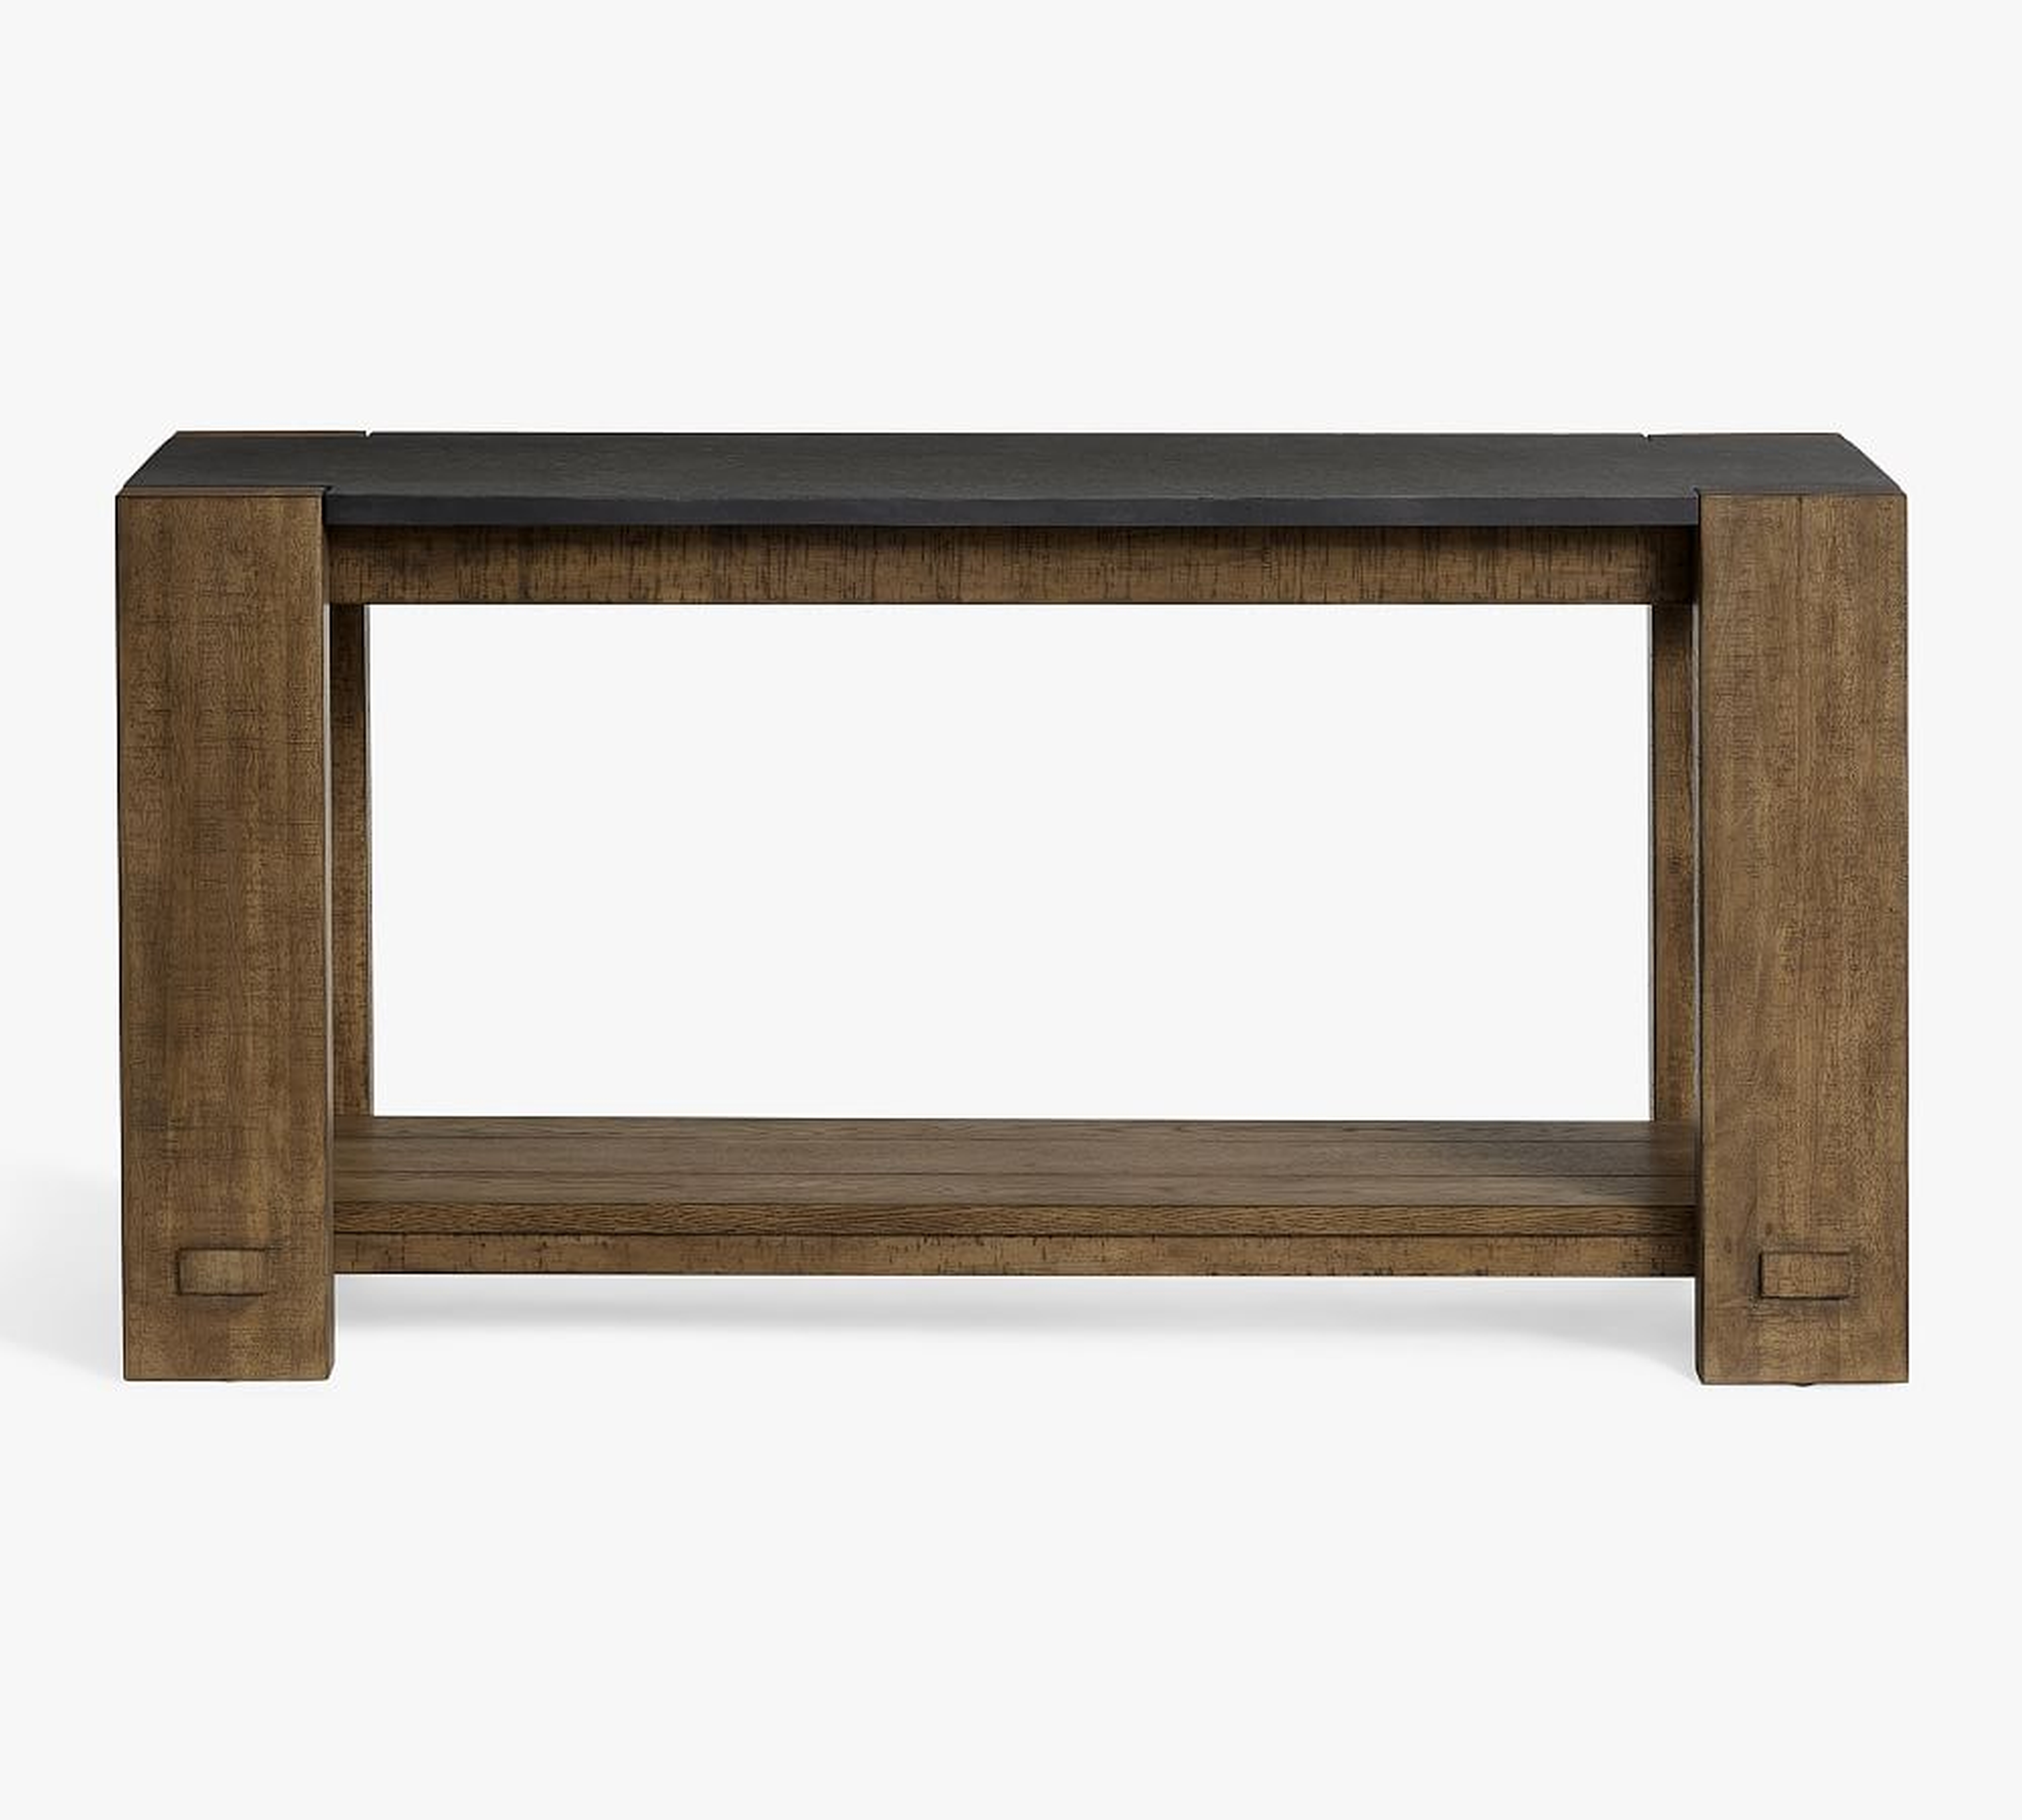 Westbrook 60" Console Table, Smoked Nutmeg - Pottery Barn